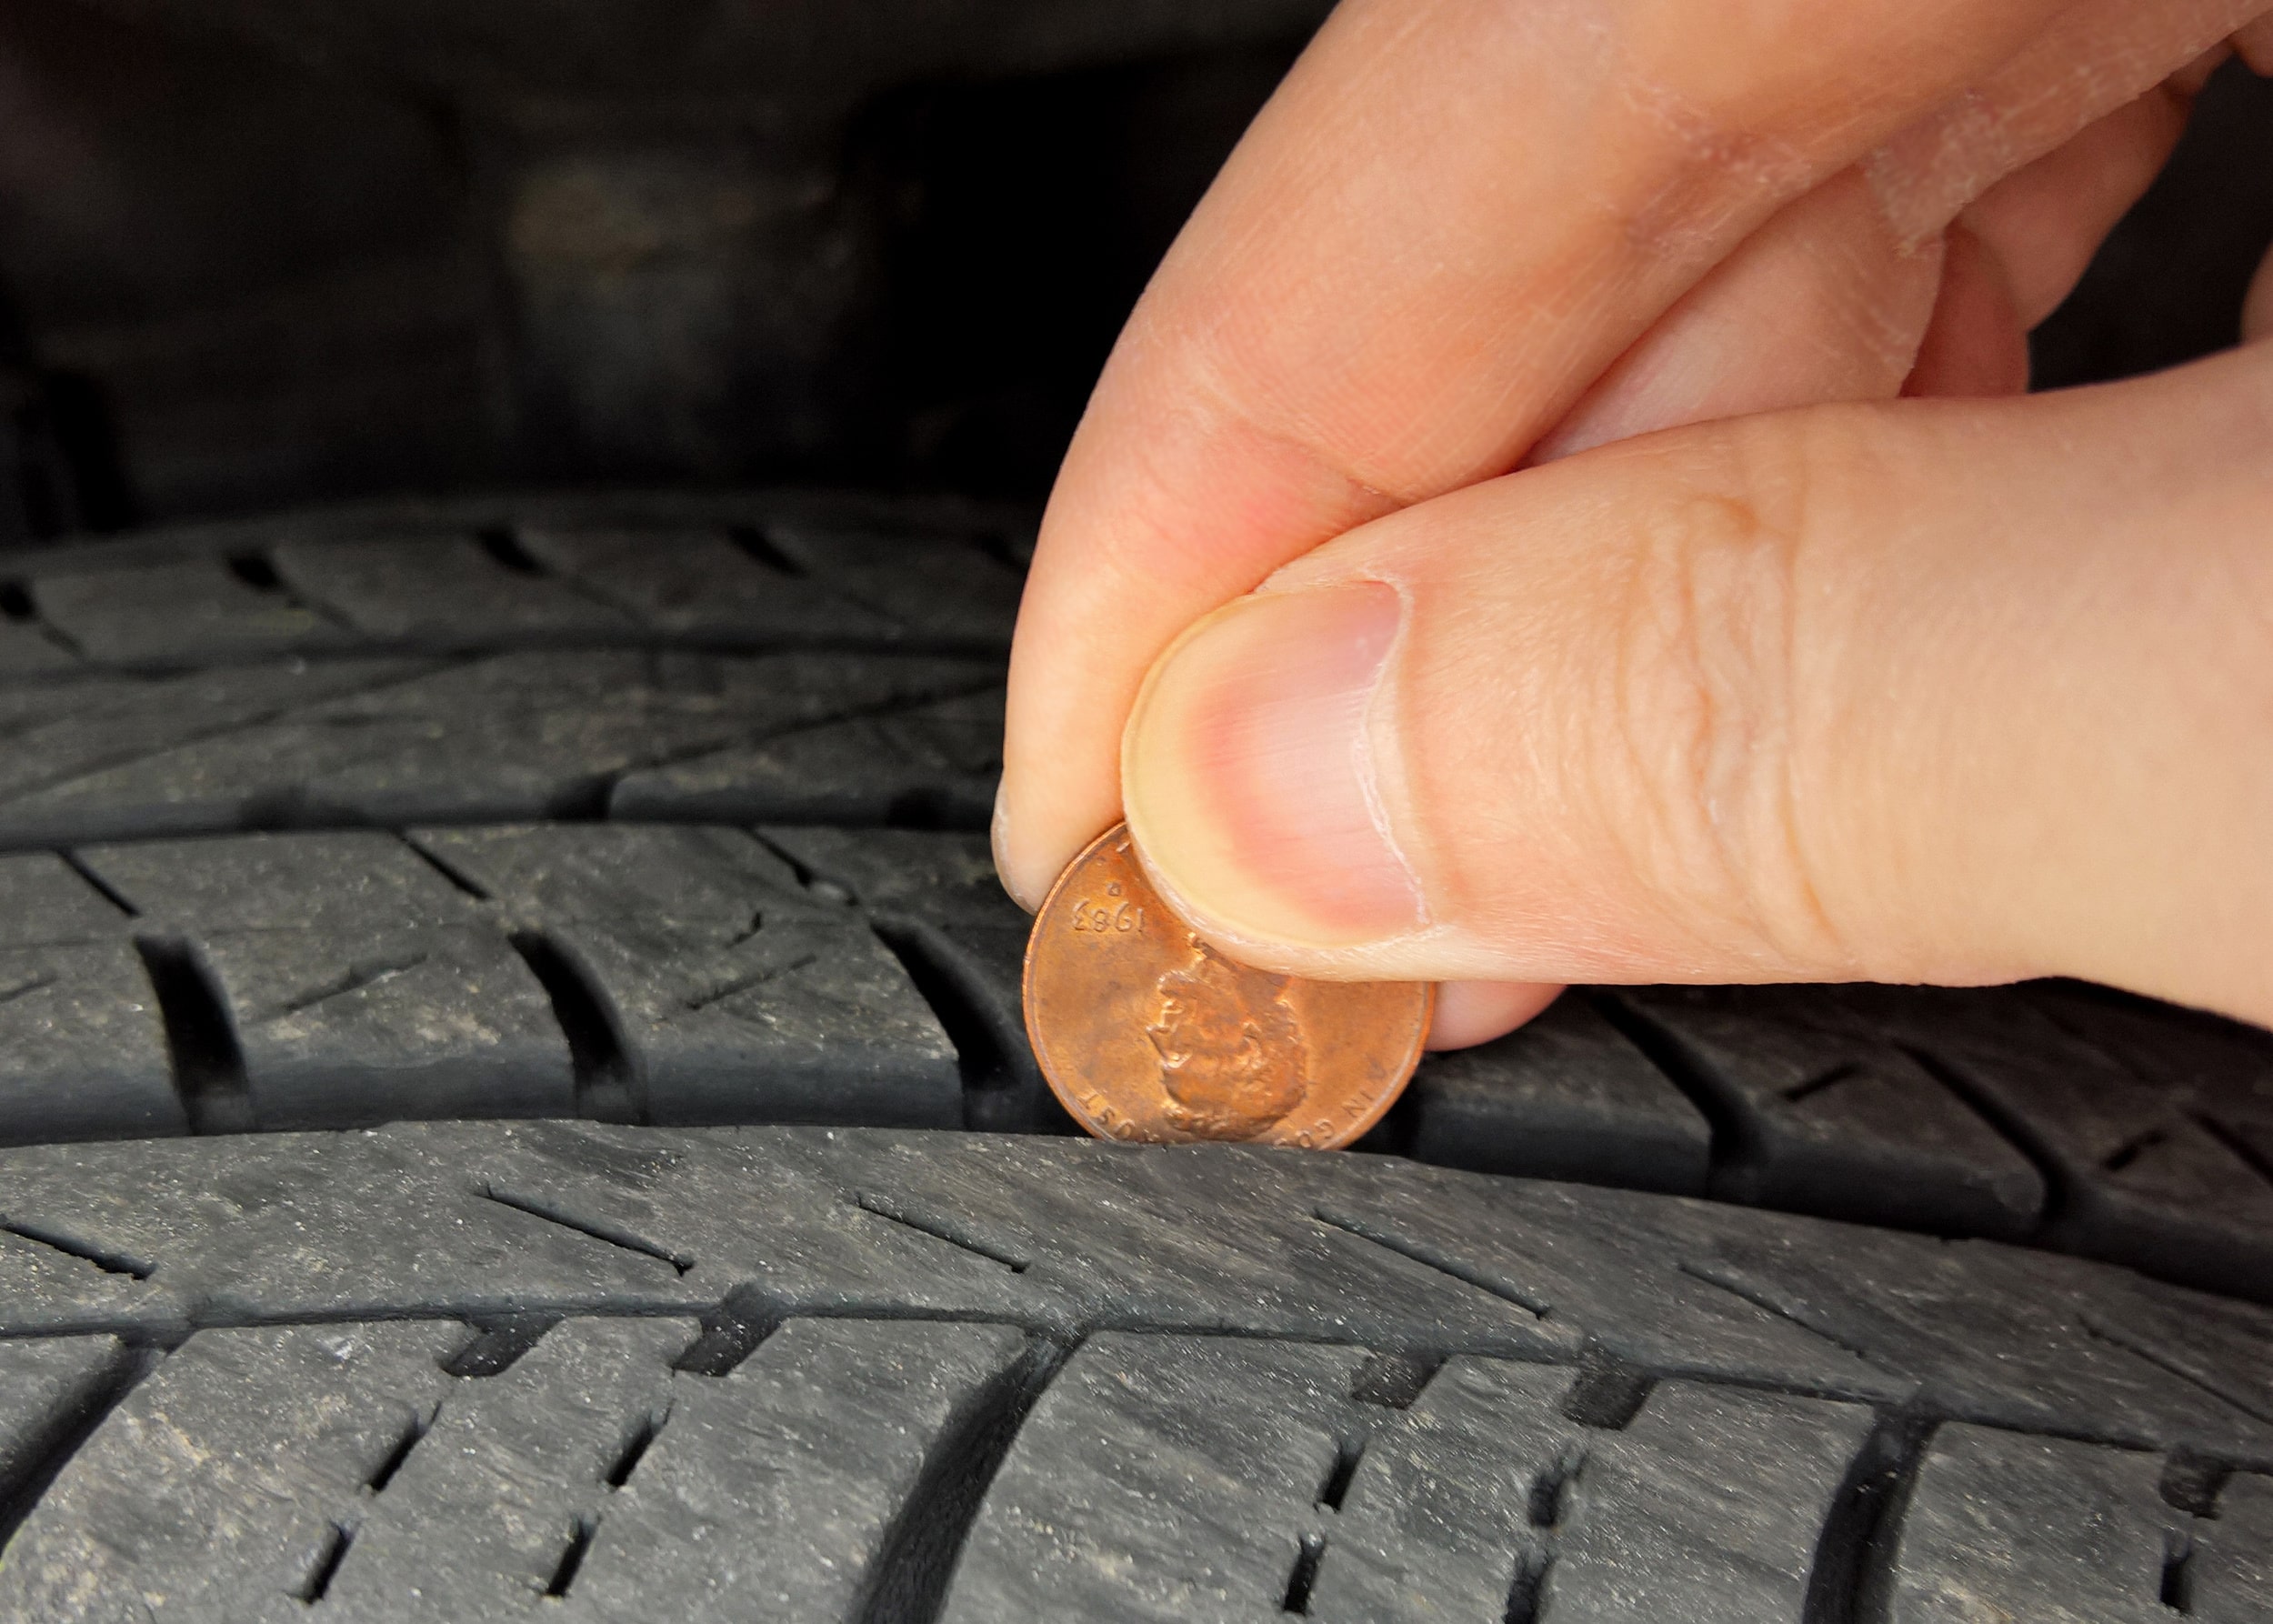 How to Inspect Your Tires